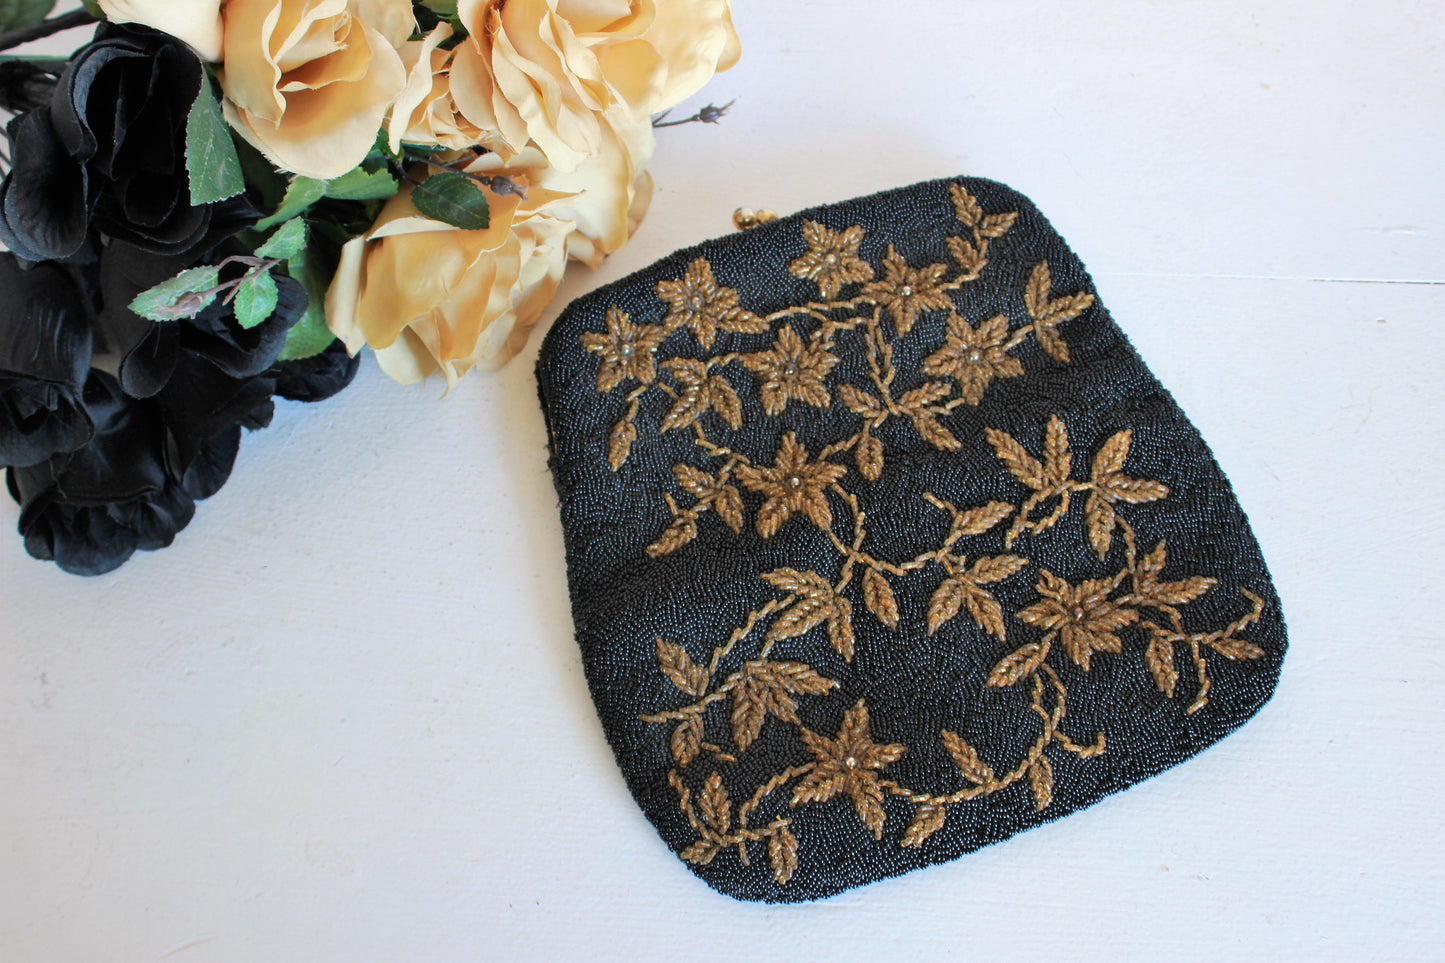 Vintage 1950s Beaded Clutch Bag With Golden Flowers